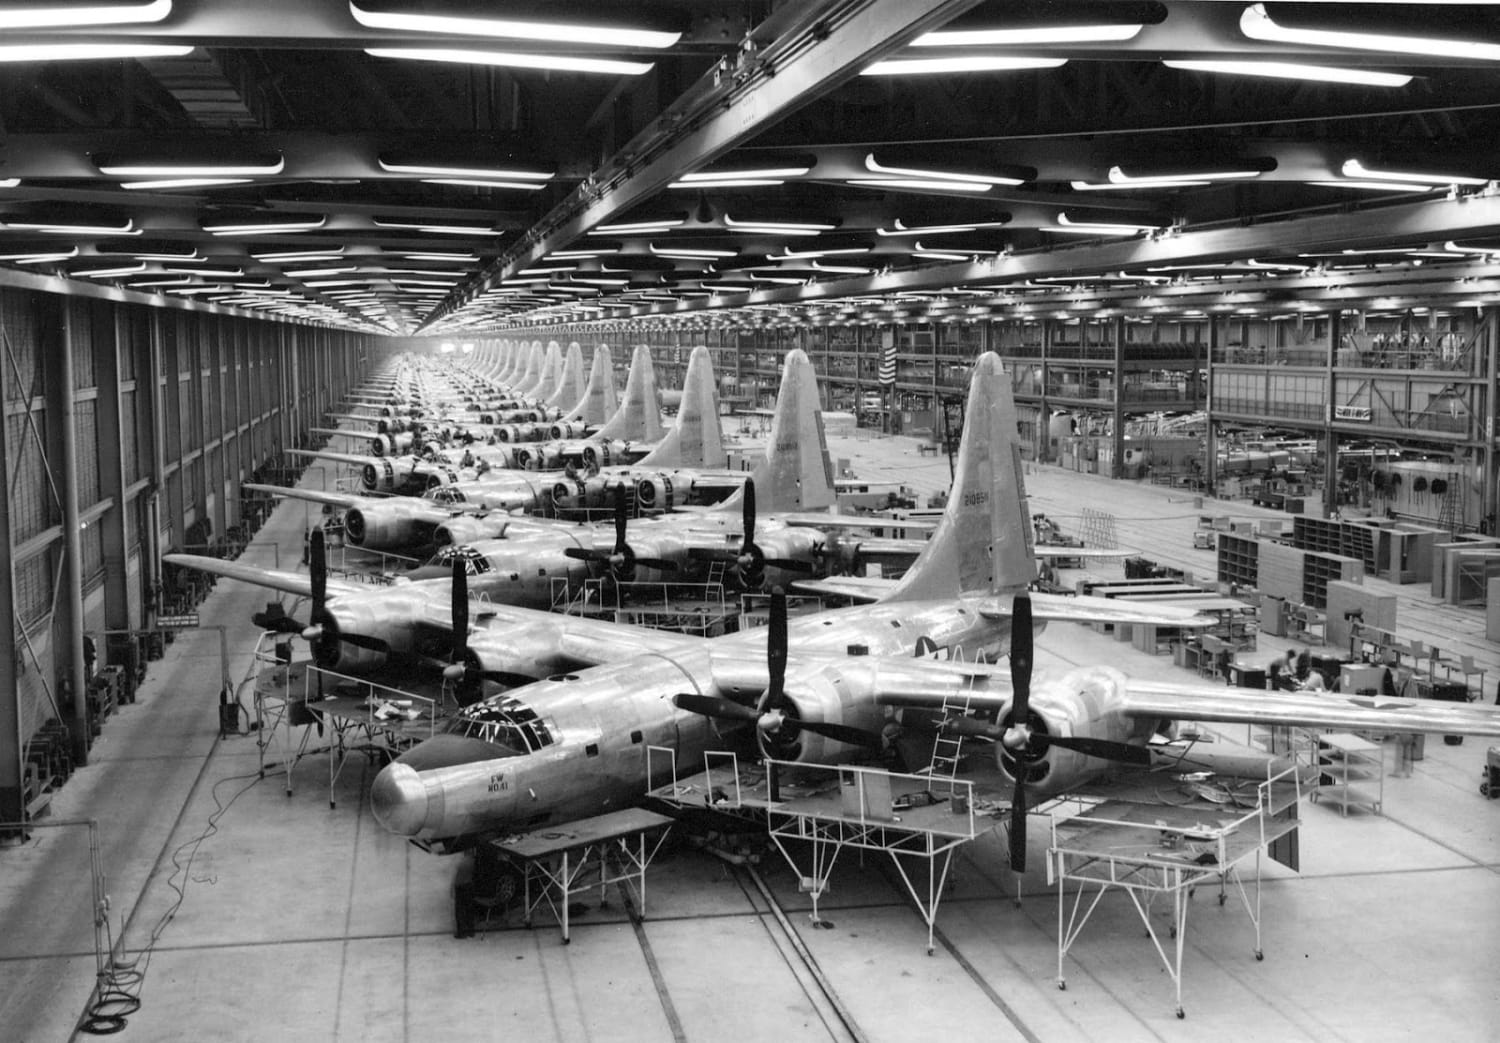 B-32 Bomber Factory in Fort Worth, Texas - 1944